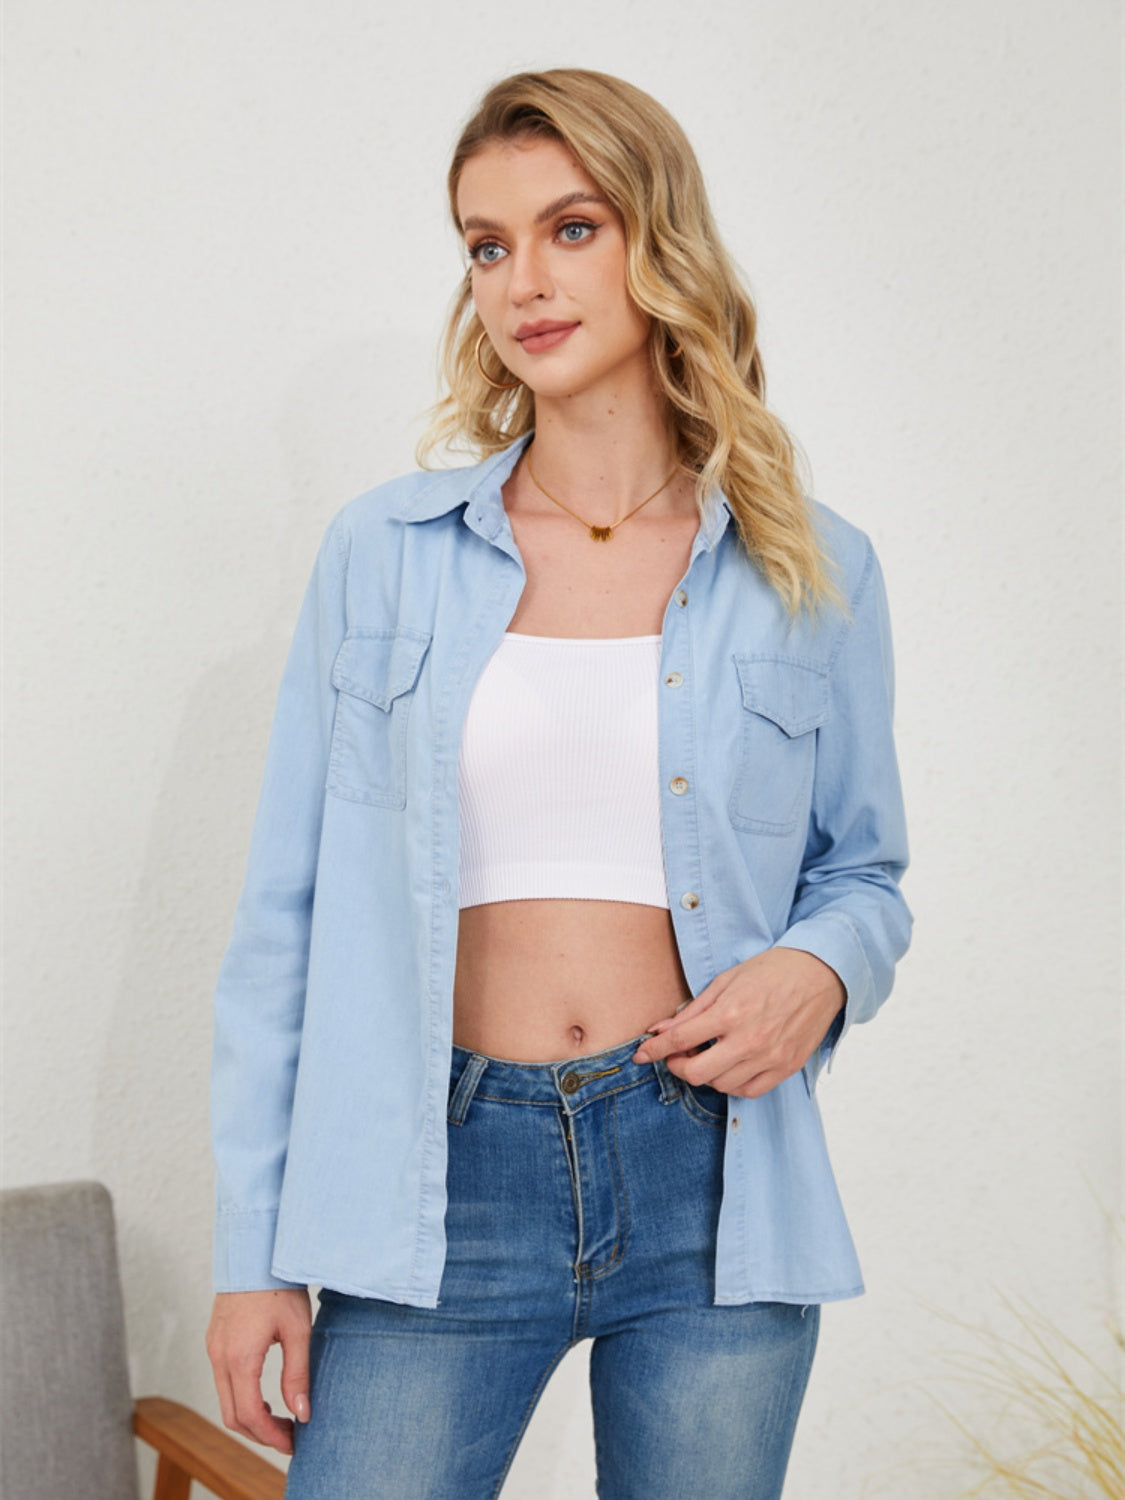 A woman is casually styled in a light denim button-up shirt, left open to reveal a white crop top underneath, and paired with blue jeans for a cohesive, double-denim look.